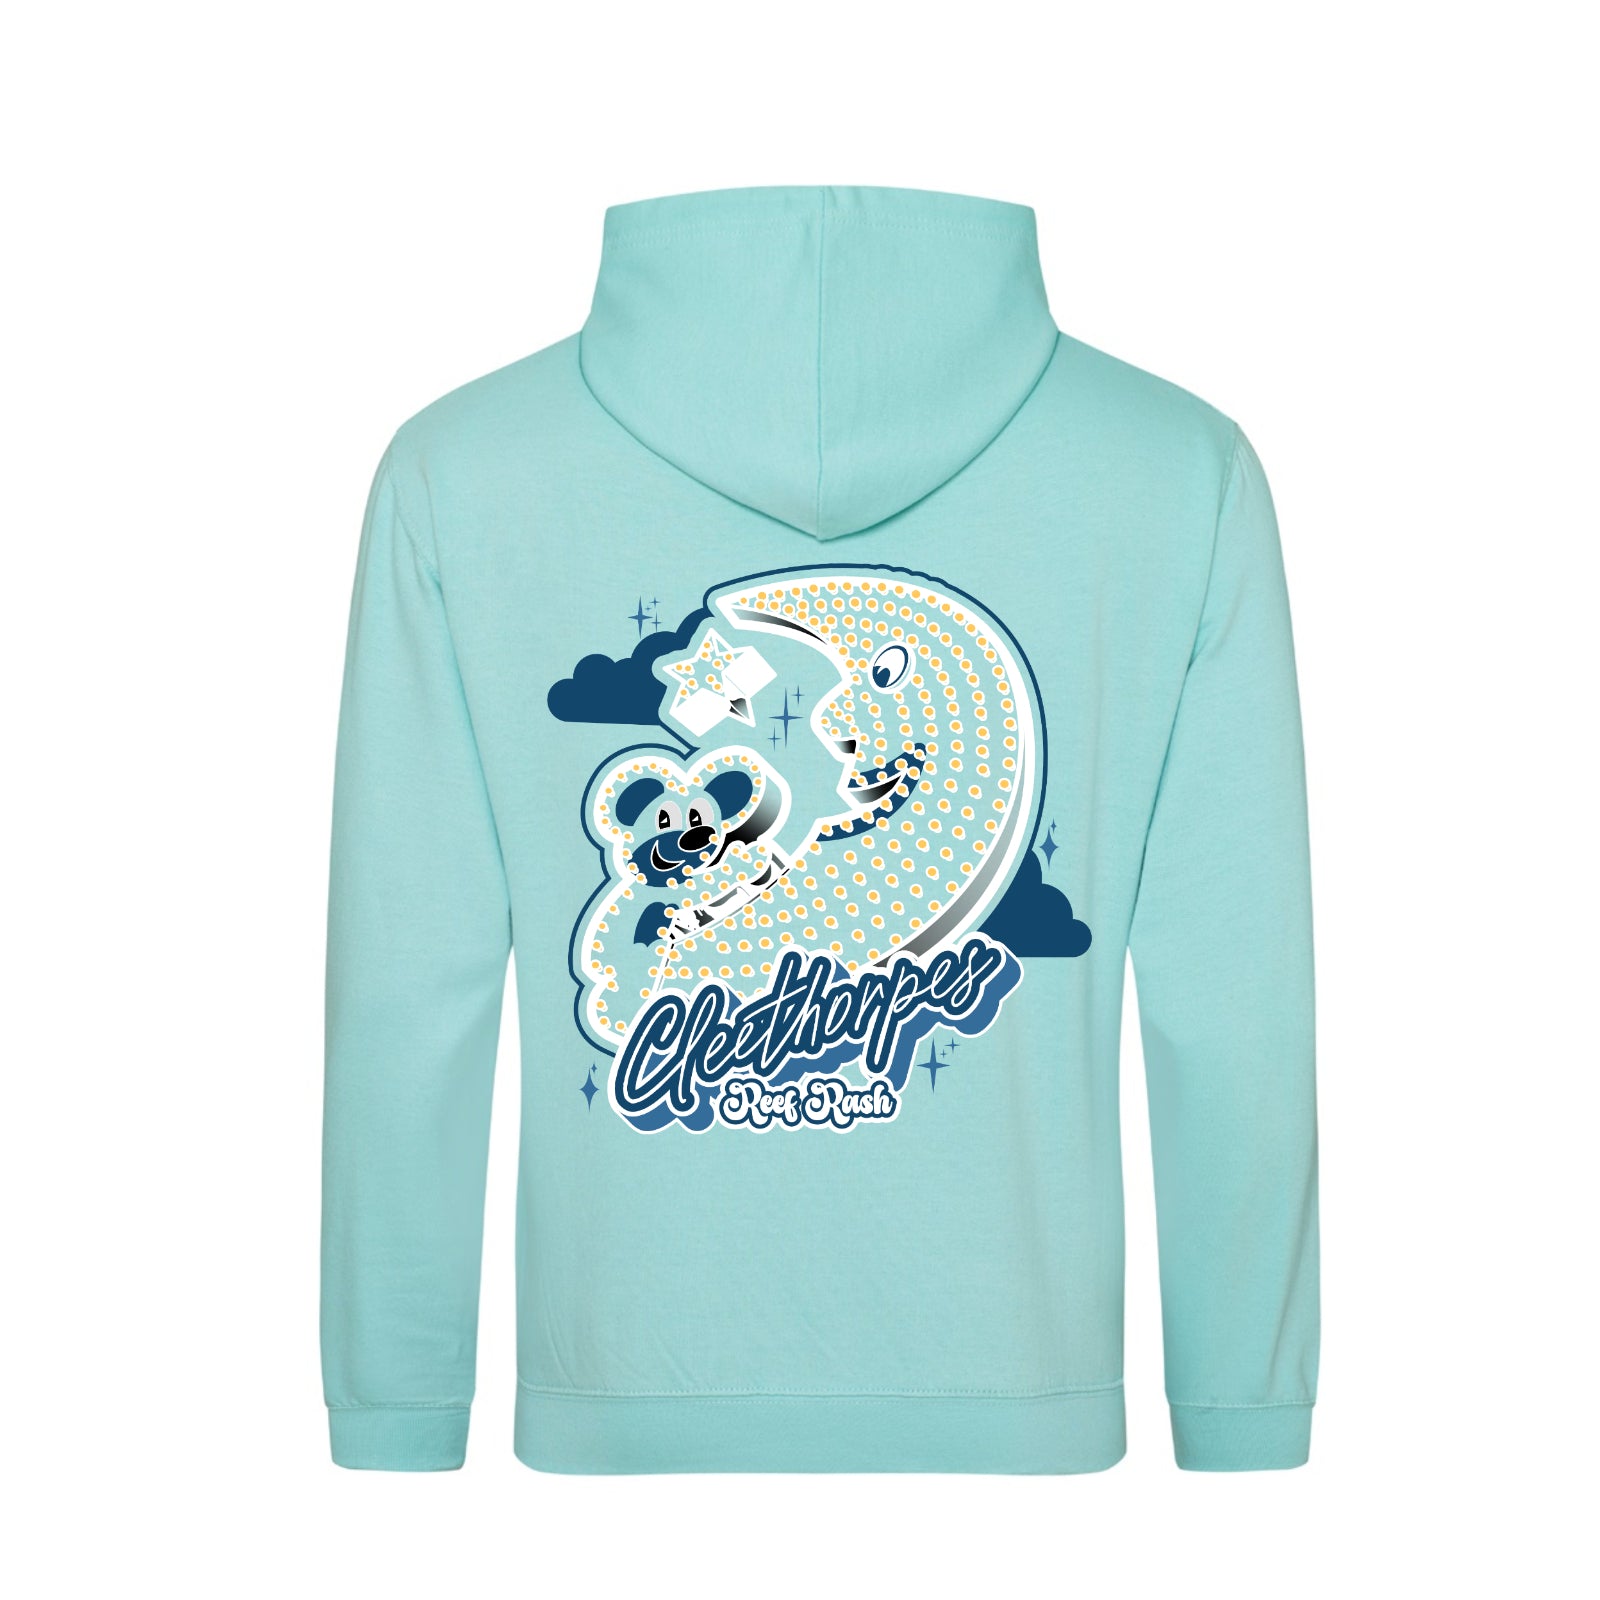 CLEETHORPES MOUSE AND MOON KIDS HOODIE -SEAGLASS